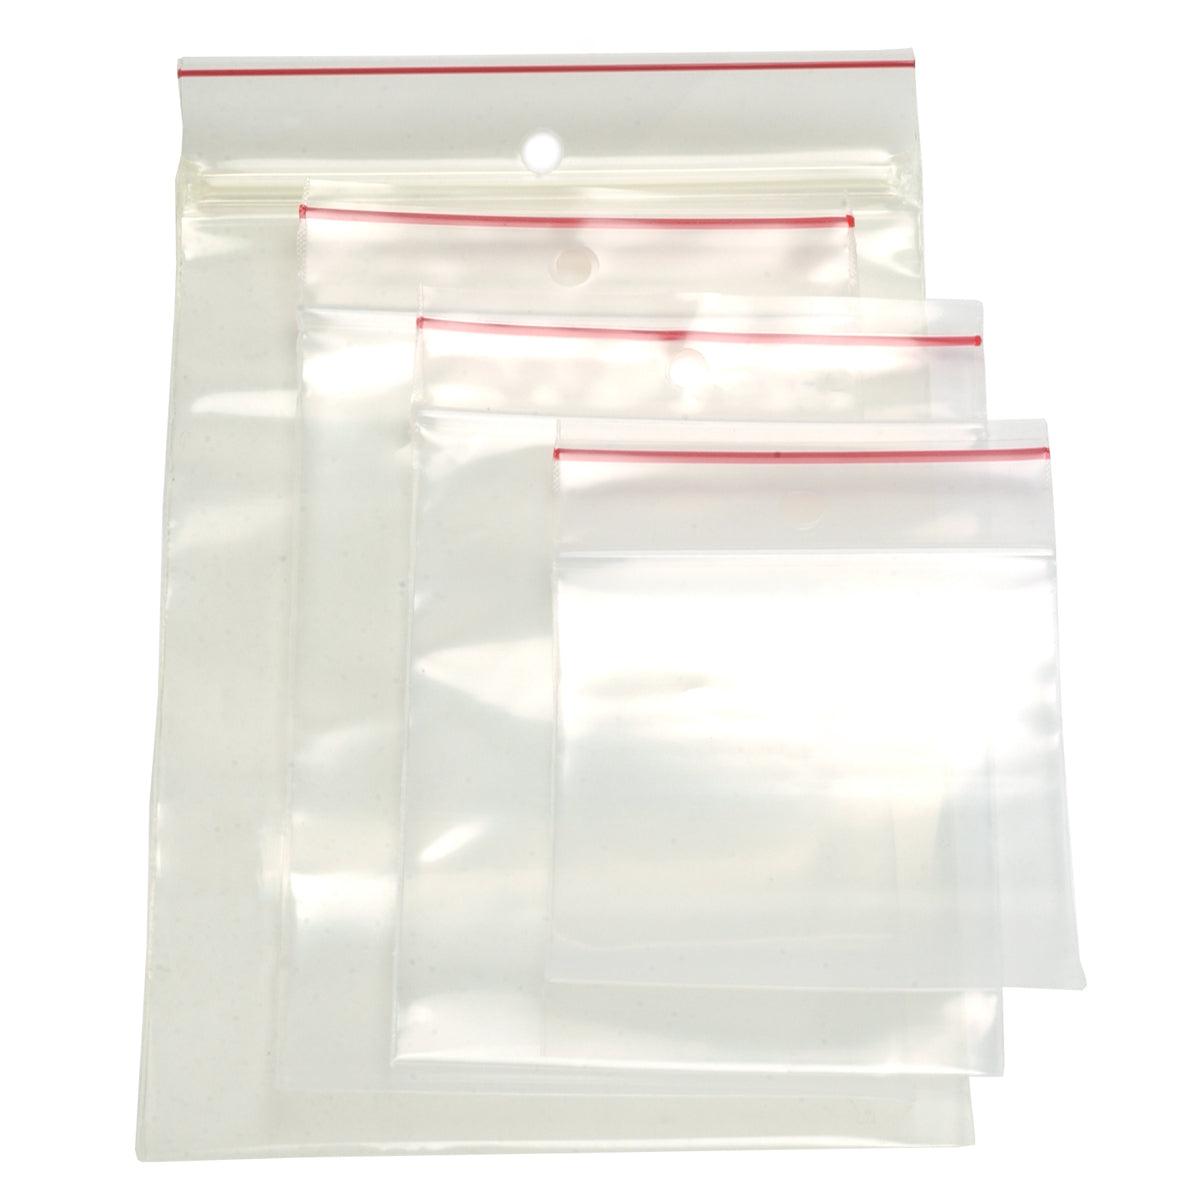 http://www.ottofrei.com/cdn/shop/files/minigrip-red-line-reclosable-plastic-bags-4-mil-thick-clear-with-hang-hole-otto-frei_09b09bfb-e619-4371-9df4-107c4bd893d8.jpg?v=1689358045